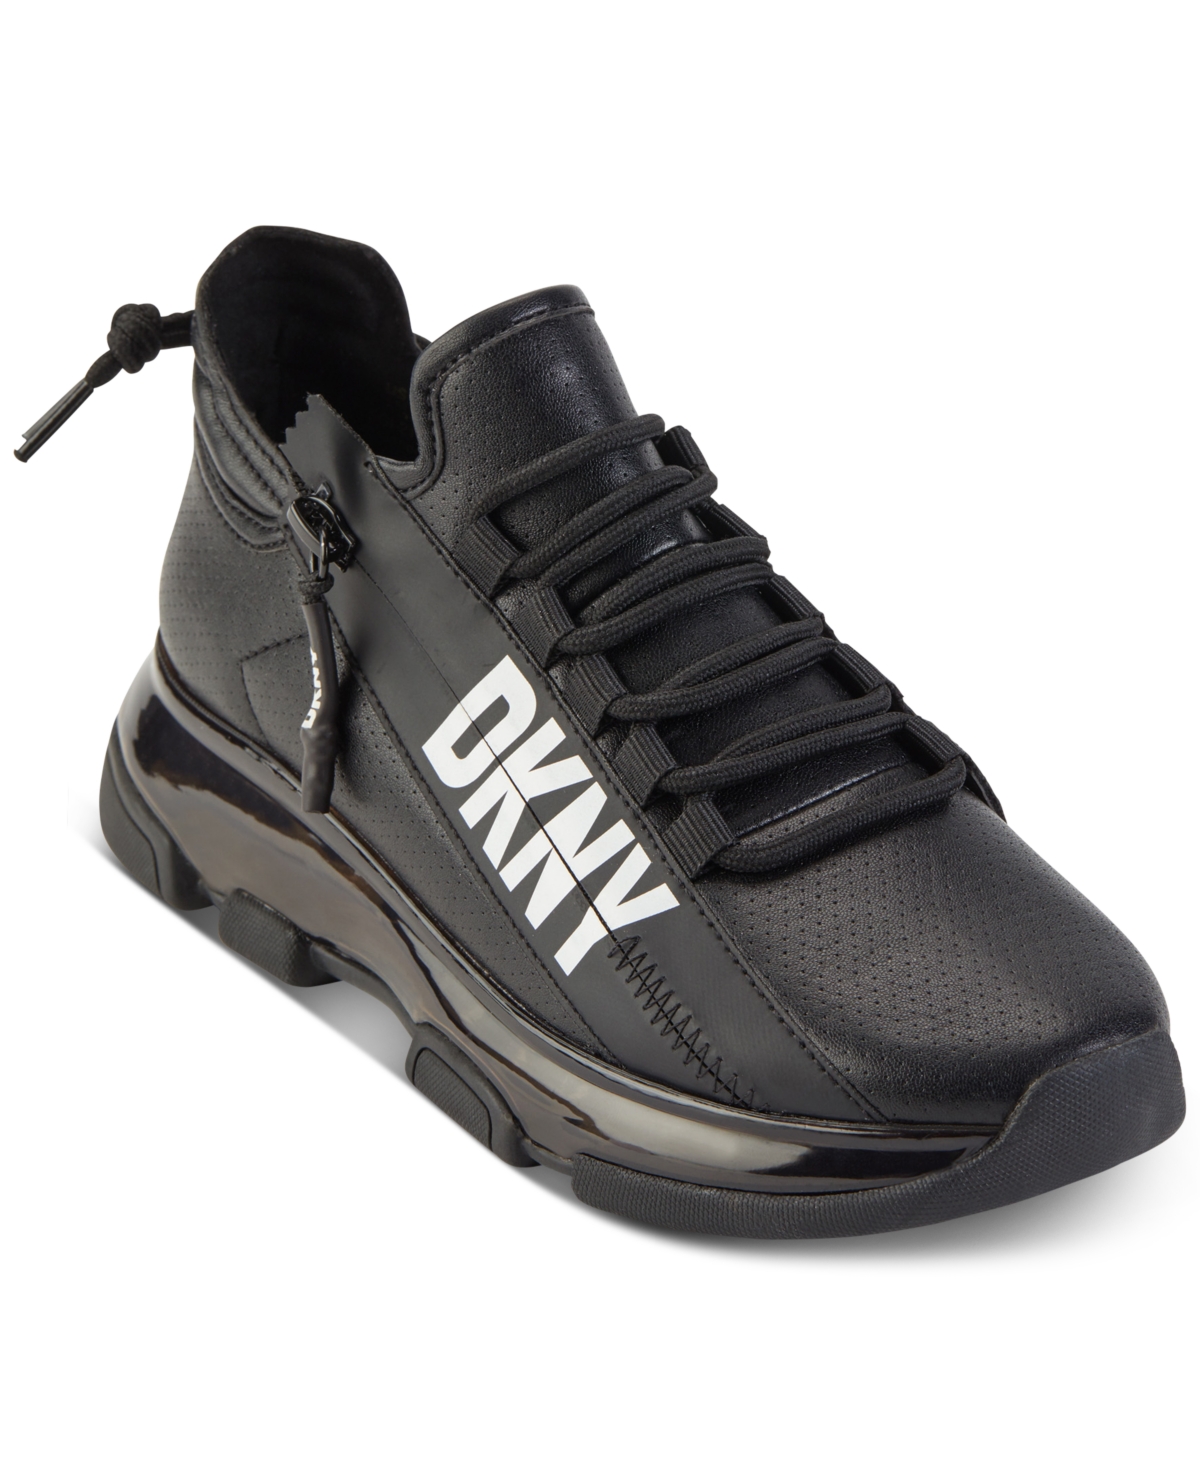 Dkny Tokyo Lace-Up Zip Sneakers